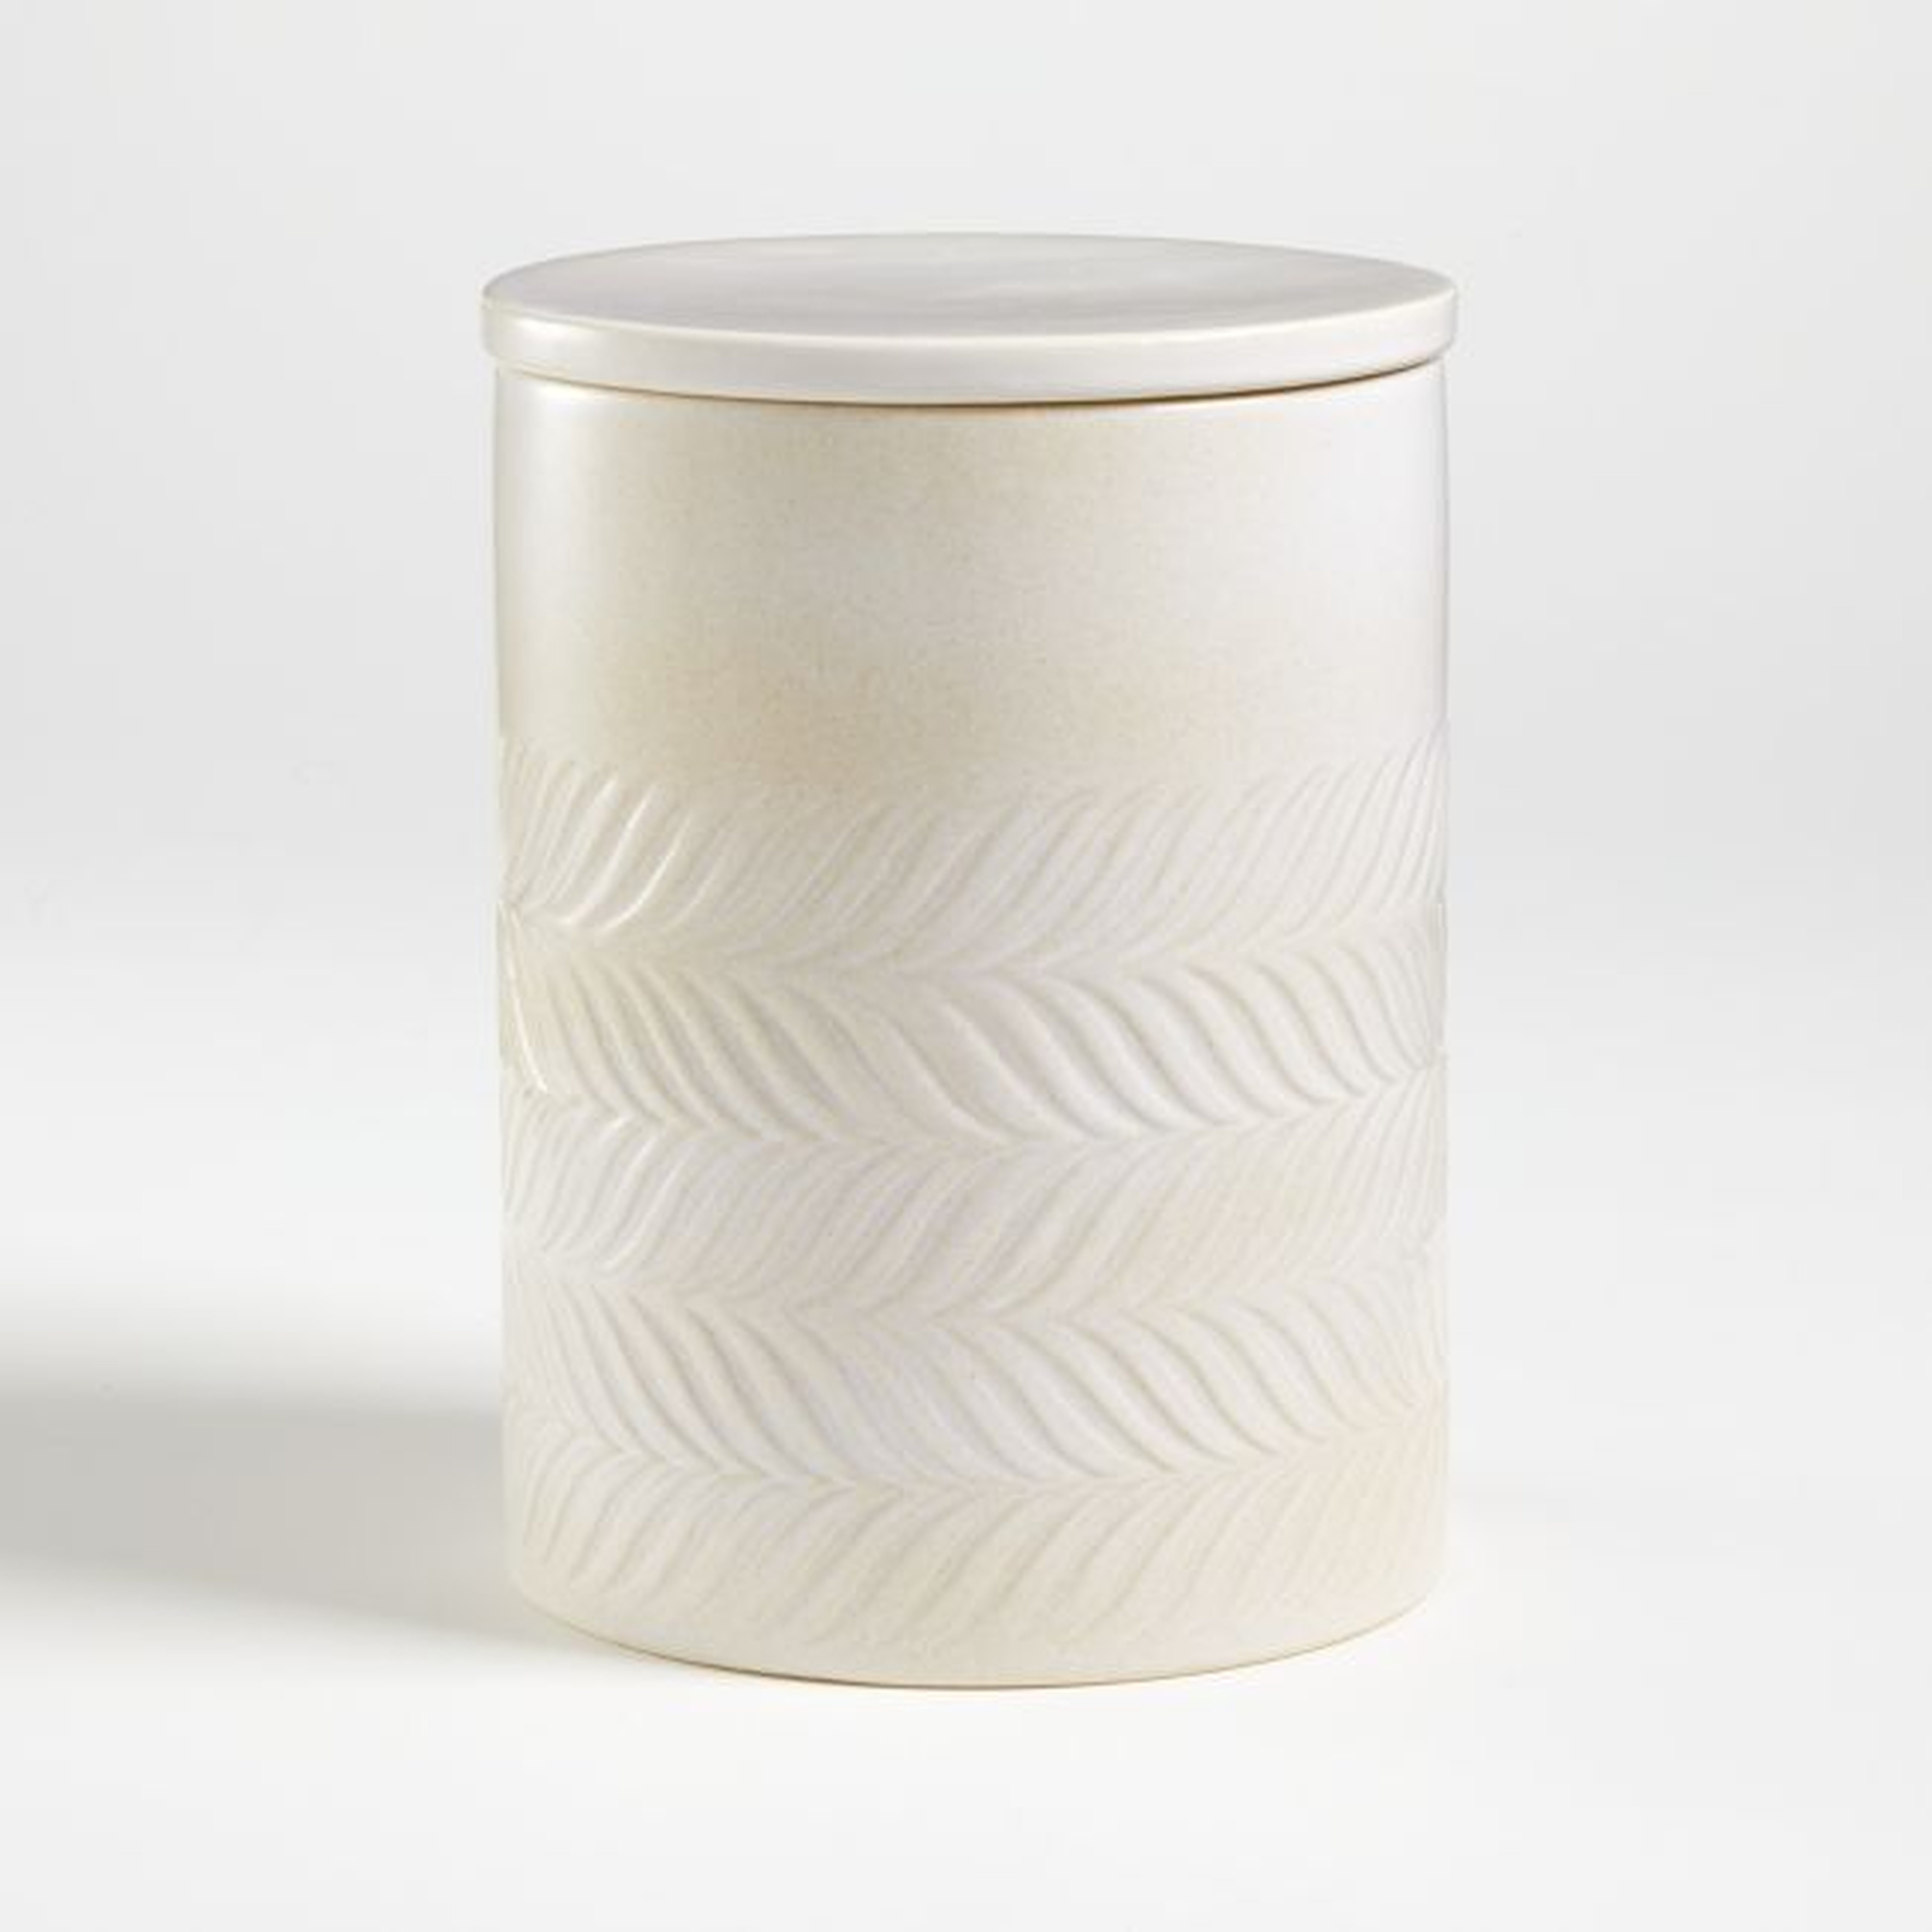 Fern Large White Ceramic Canister - Crate and Barrel